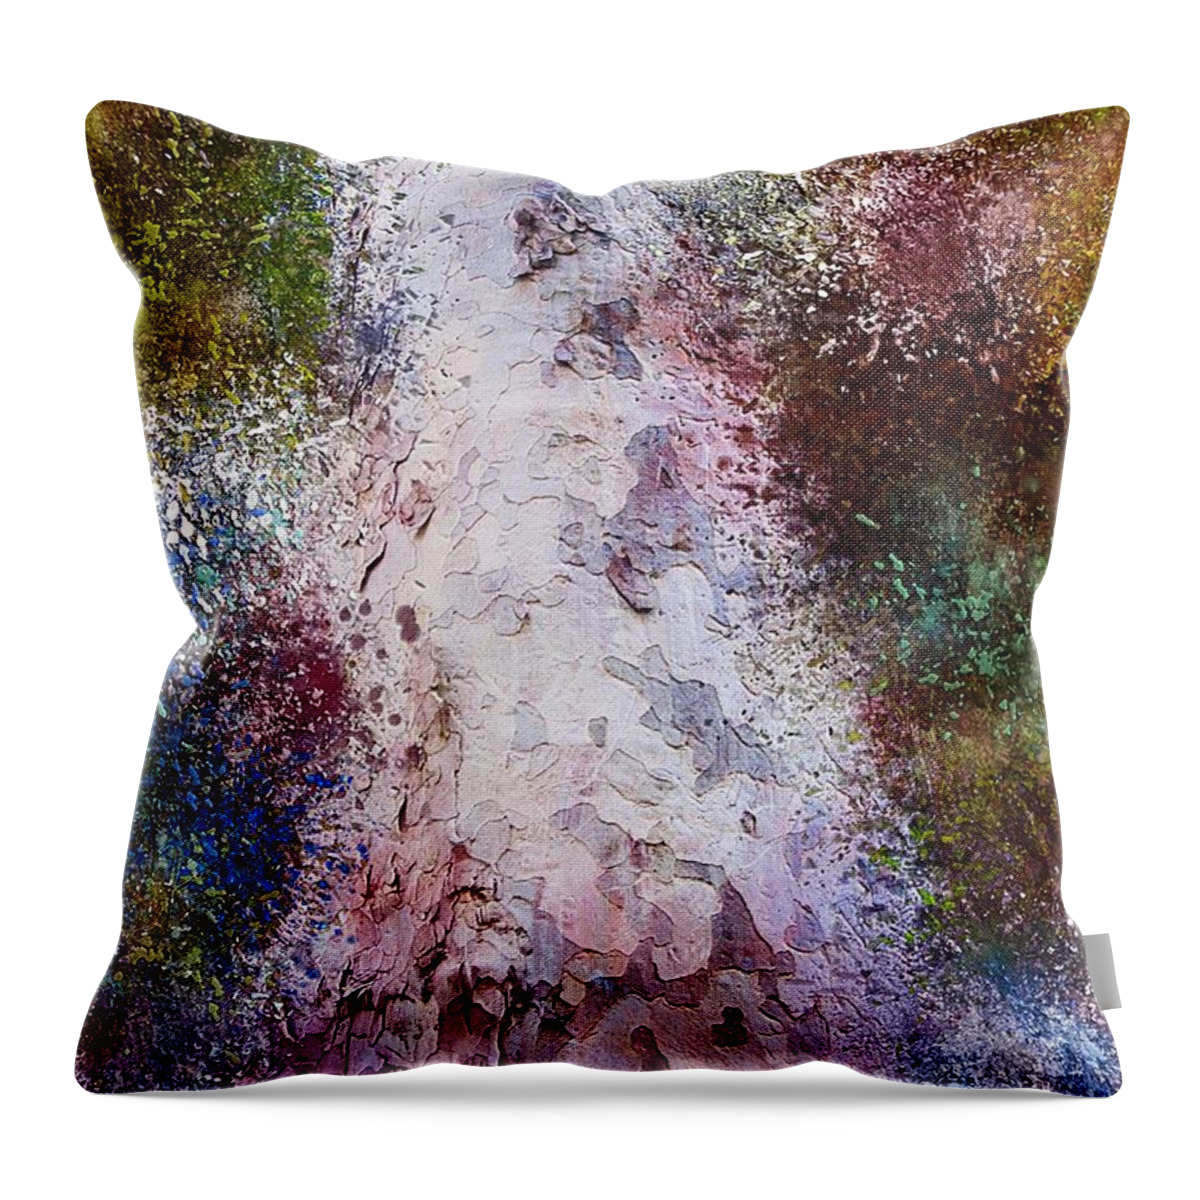 Seasonsseasons Of A Tree Throw Pillow featuring the painting Seasons by Mark Taylor